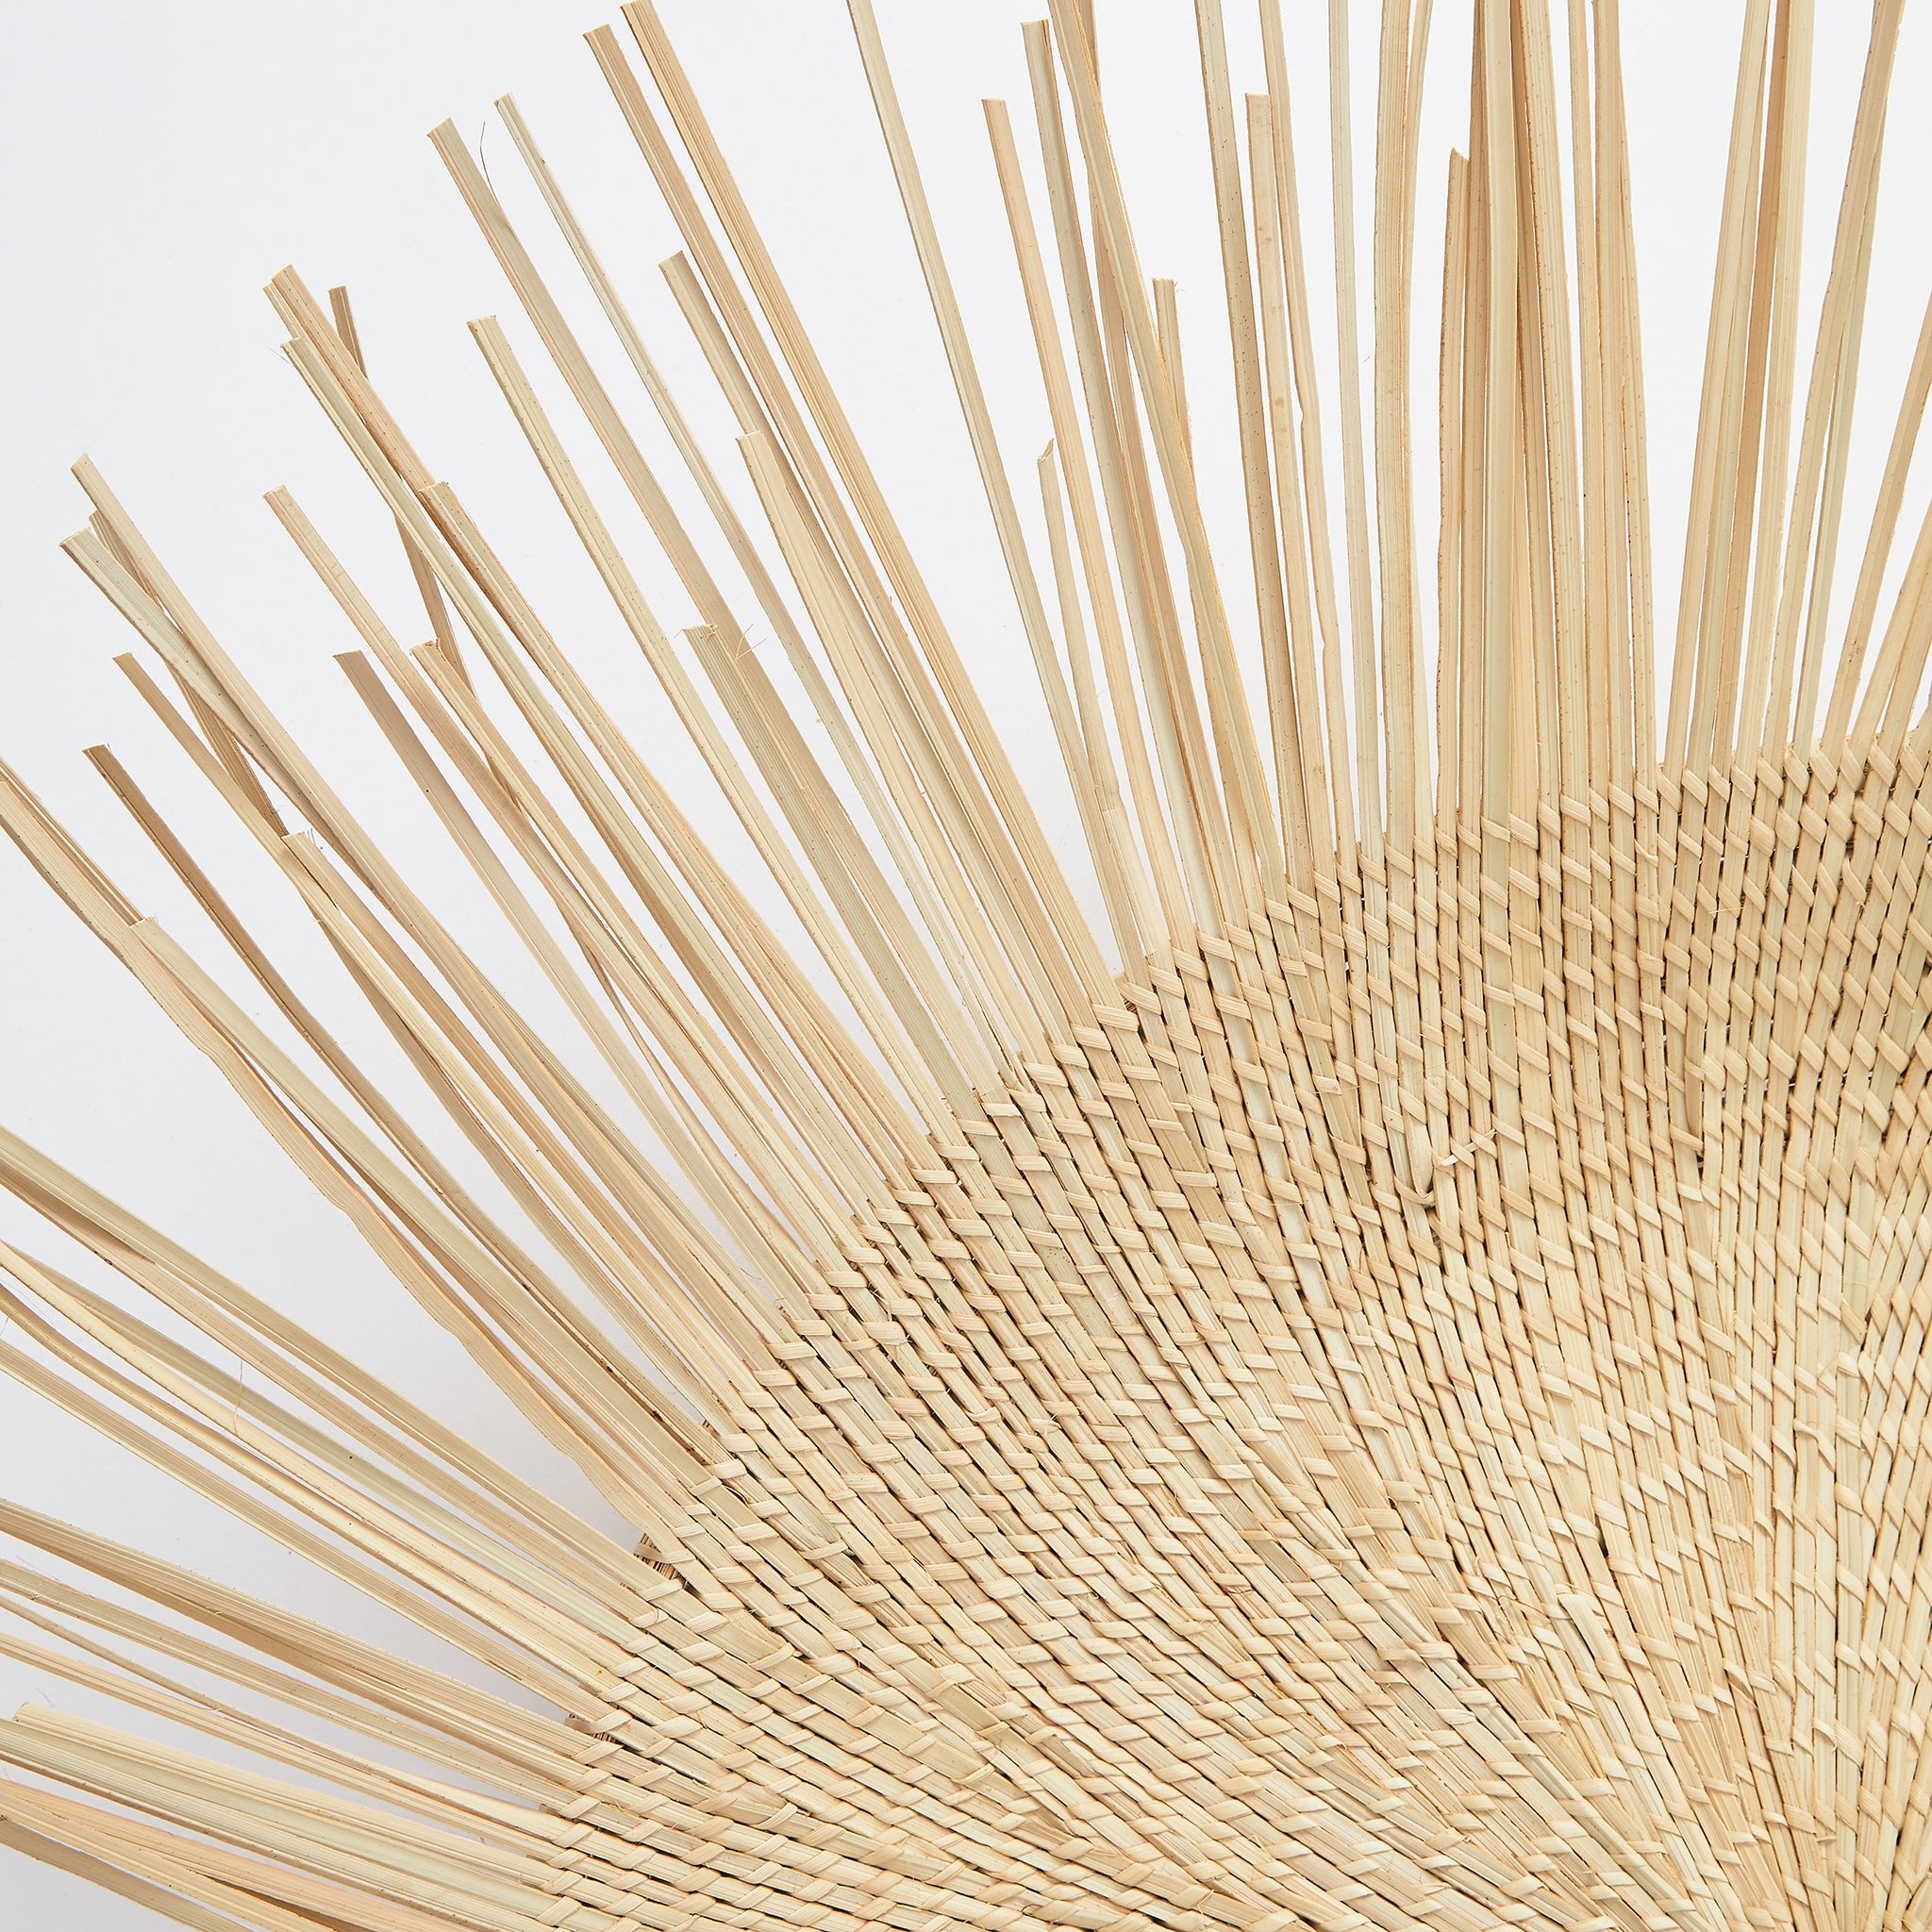 BY NATIVE Sun plate with rays, hand-woven from palm leaves in Malawi